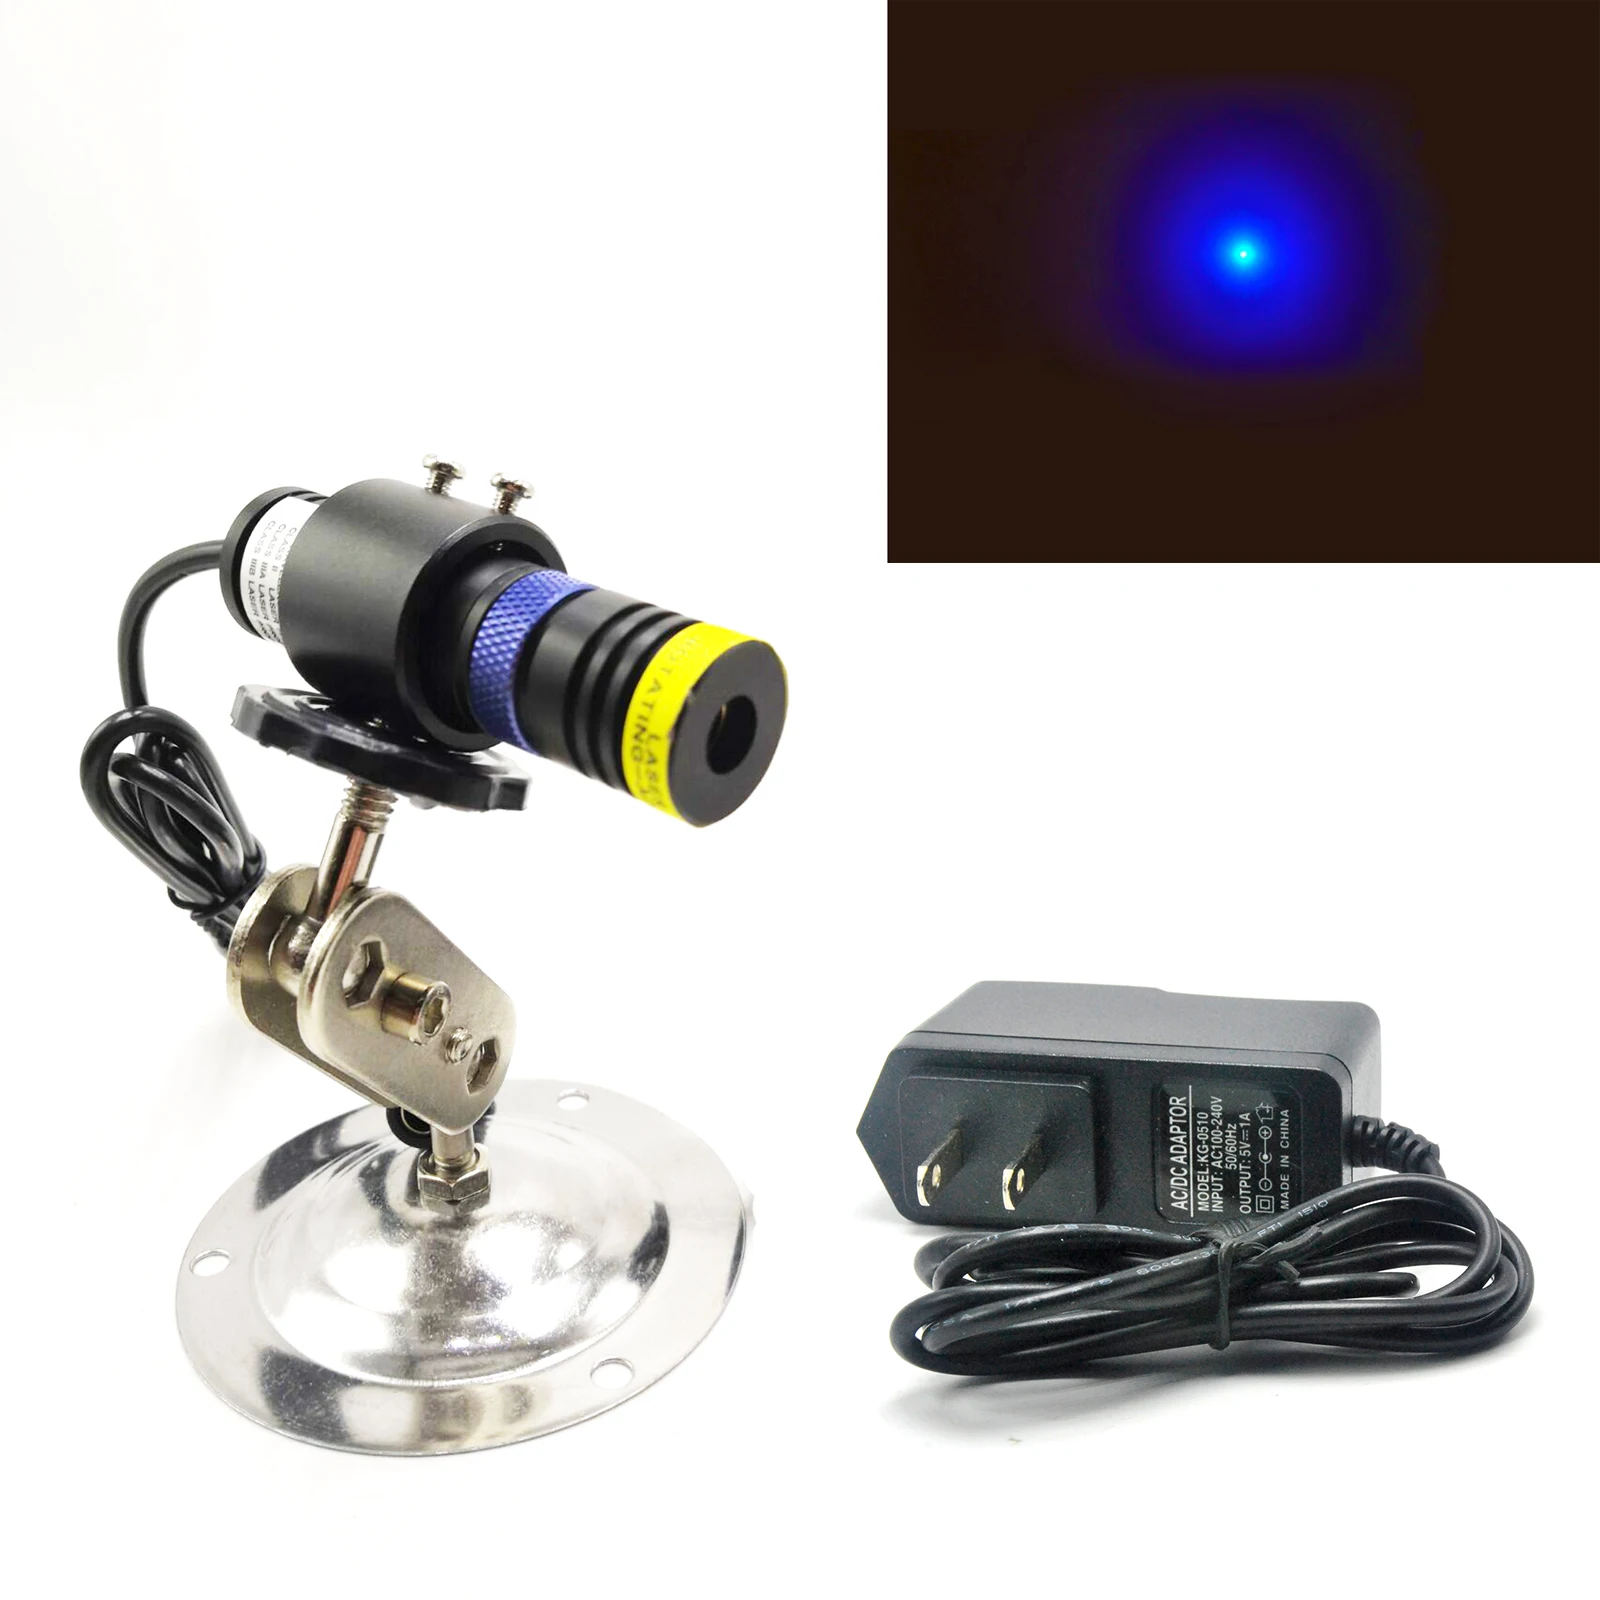 Pure Blue Light Adjustable Focus Laser Module 450nm 80mW Focusable Laser Diode Locator 18X65mm with 5V Adapter and Holder